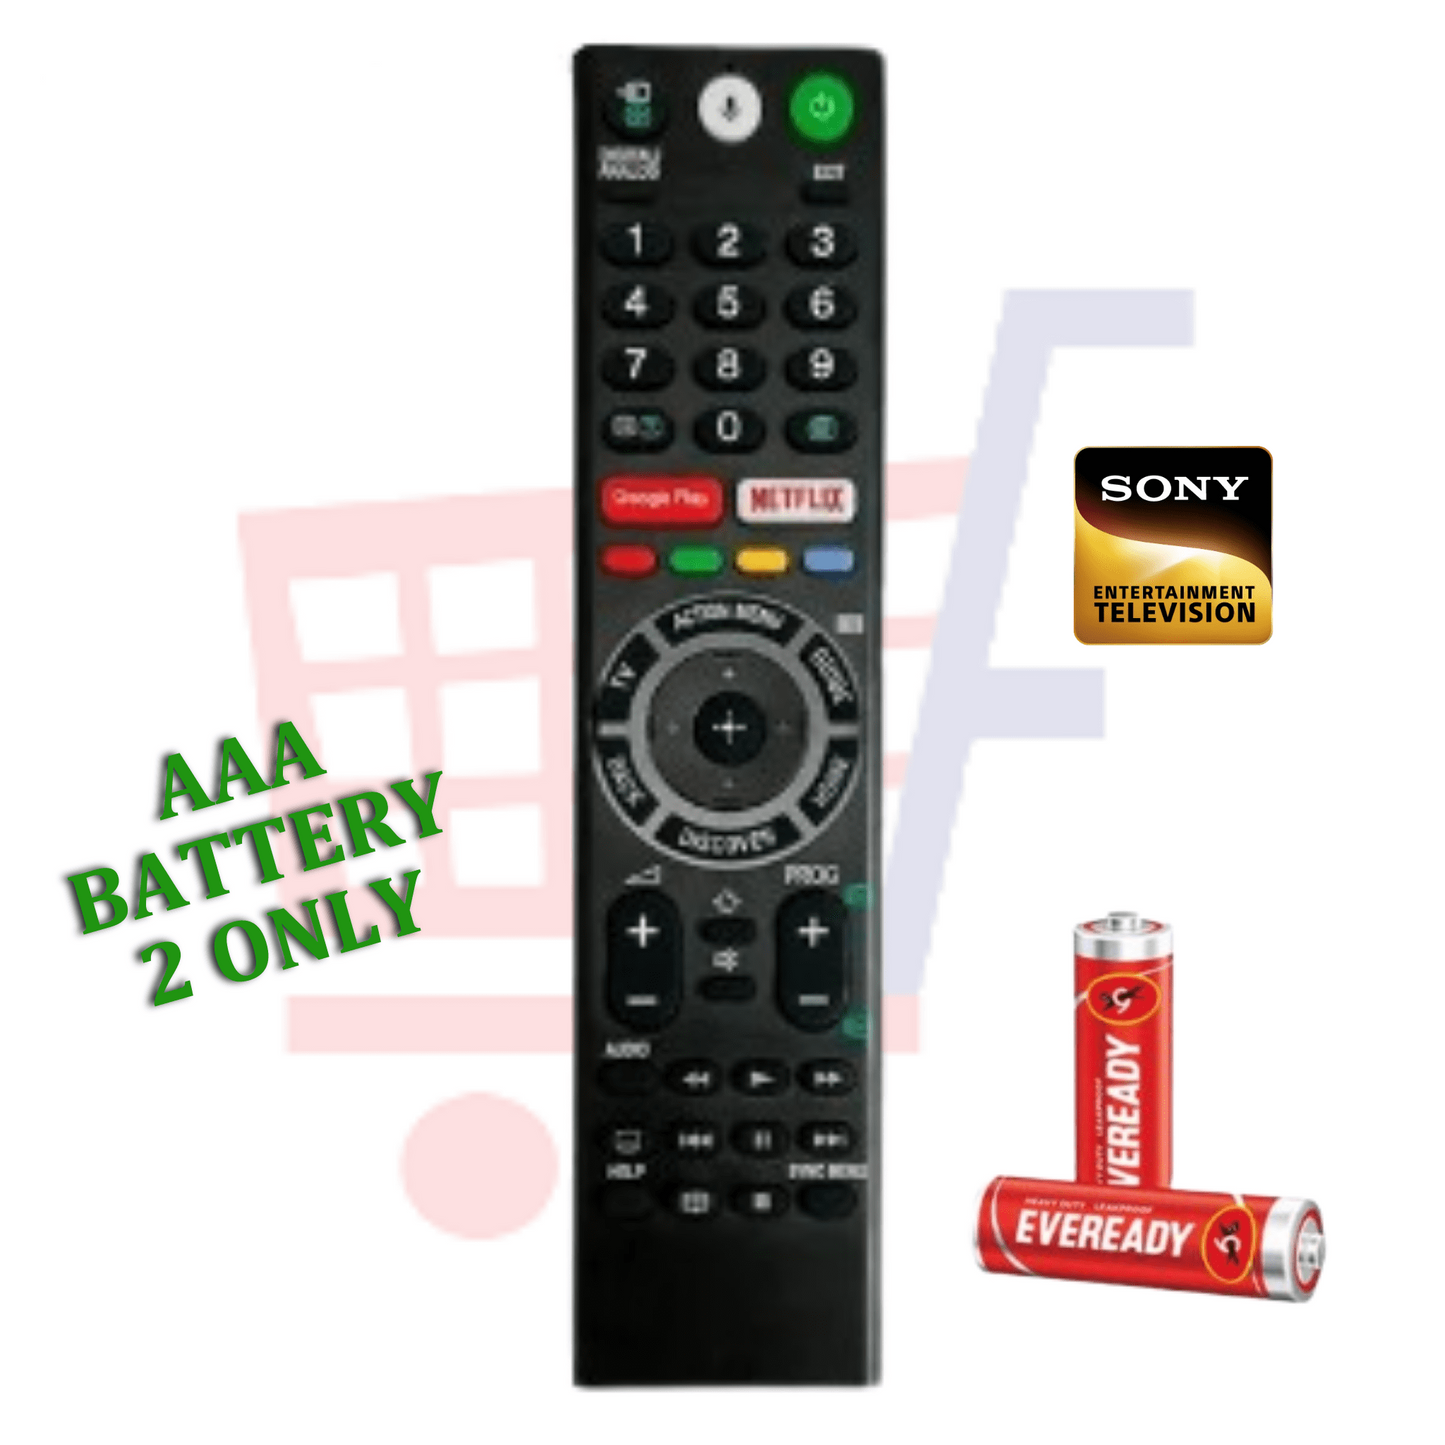 Sony Smart TV remote control Netflix,Google play,voice recognisation